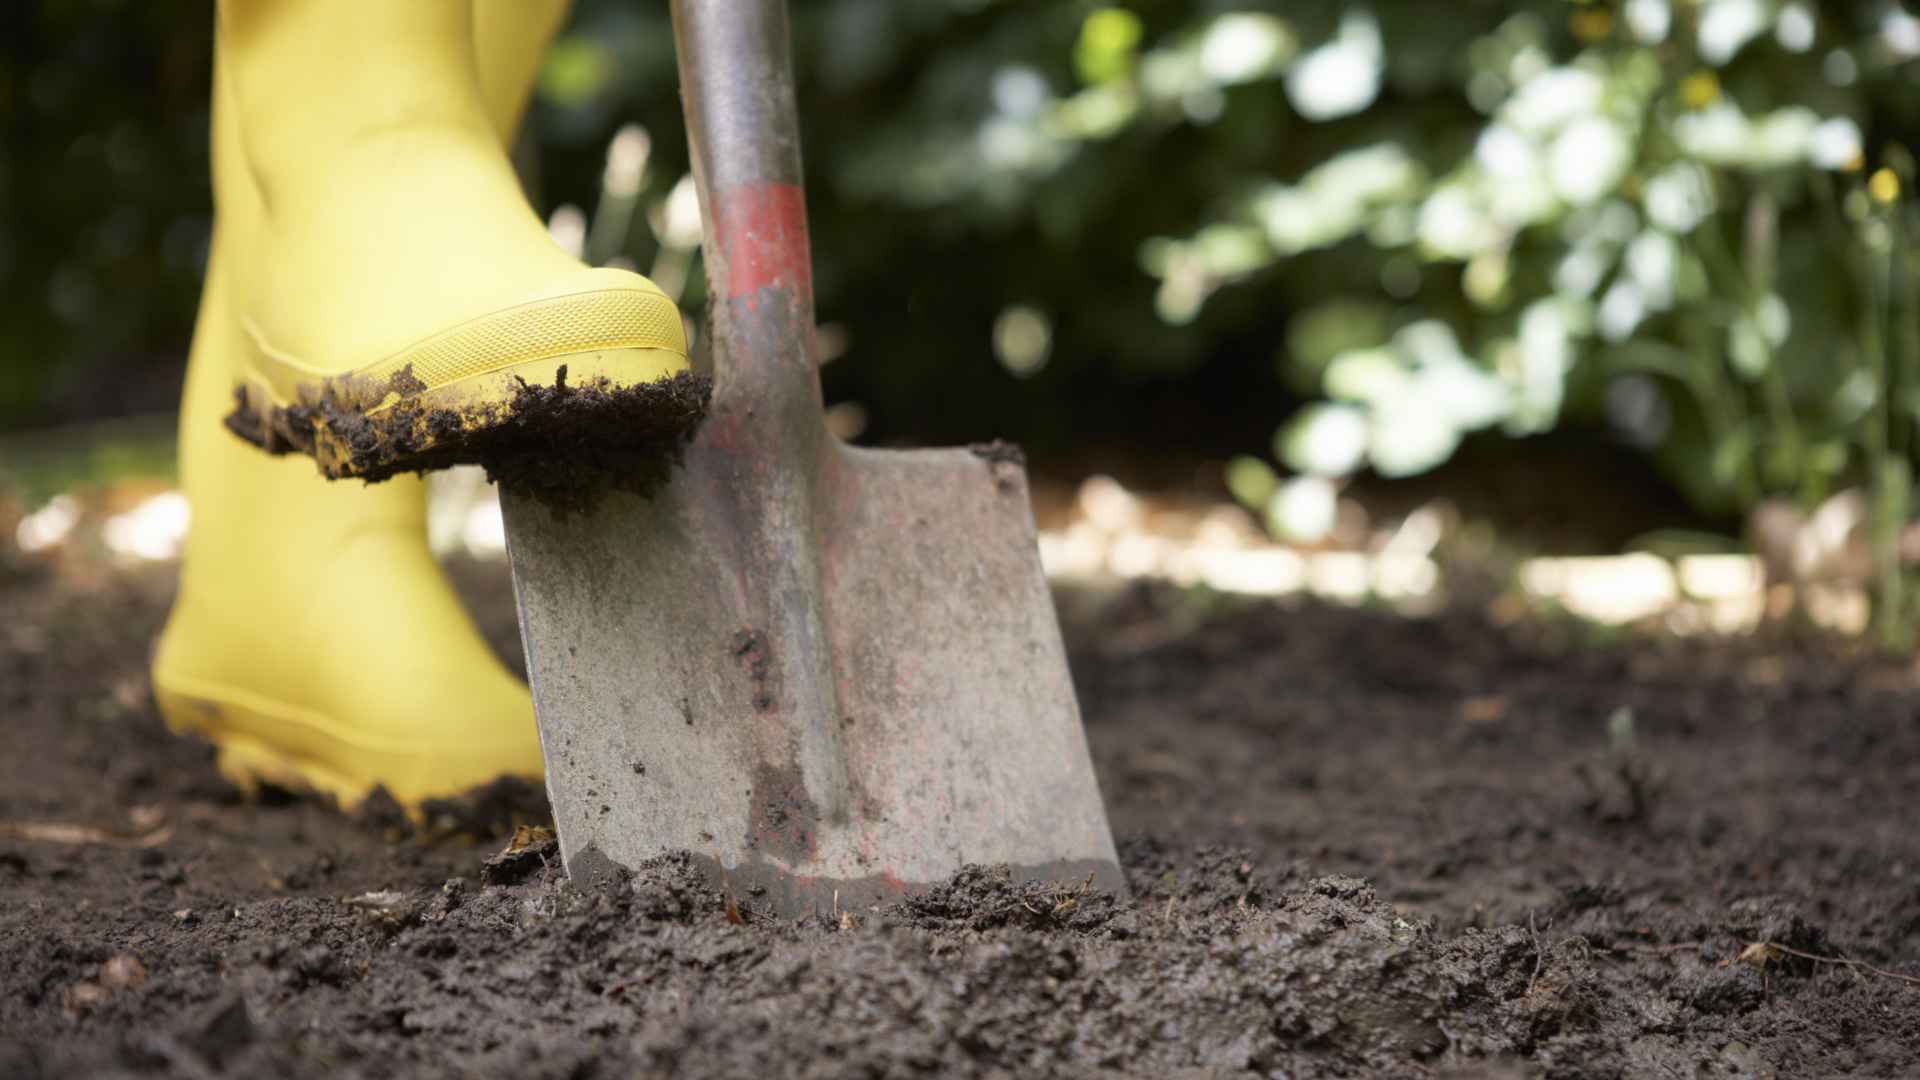 A booted foot pushing down on a spade in soil